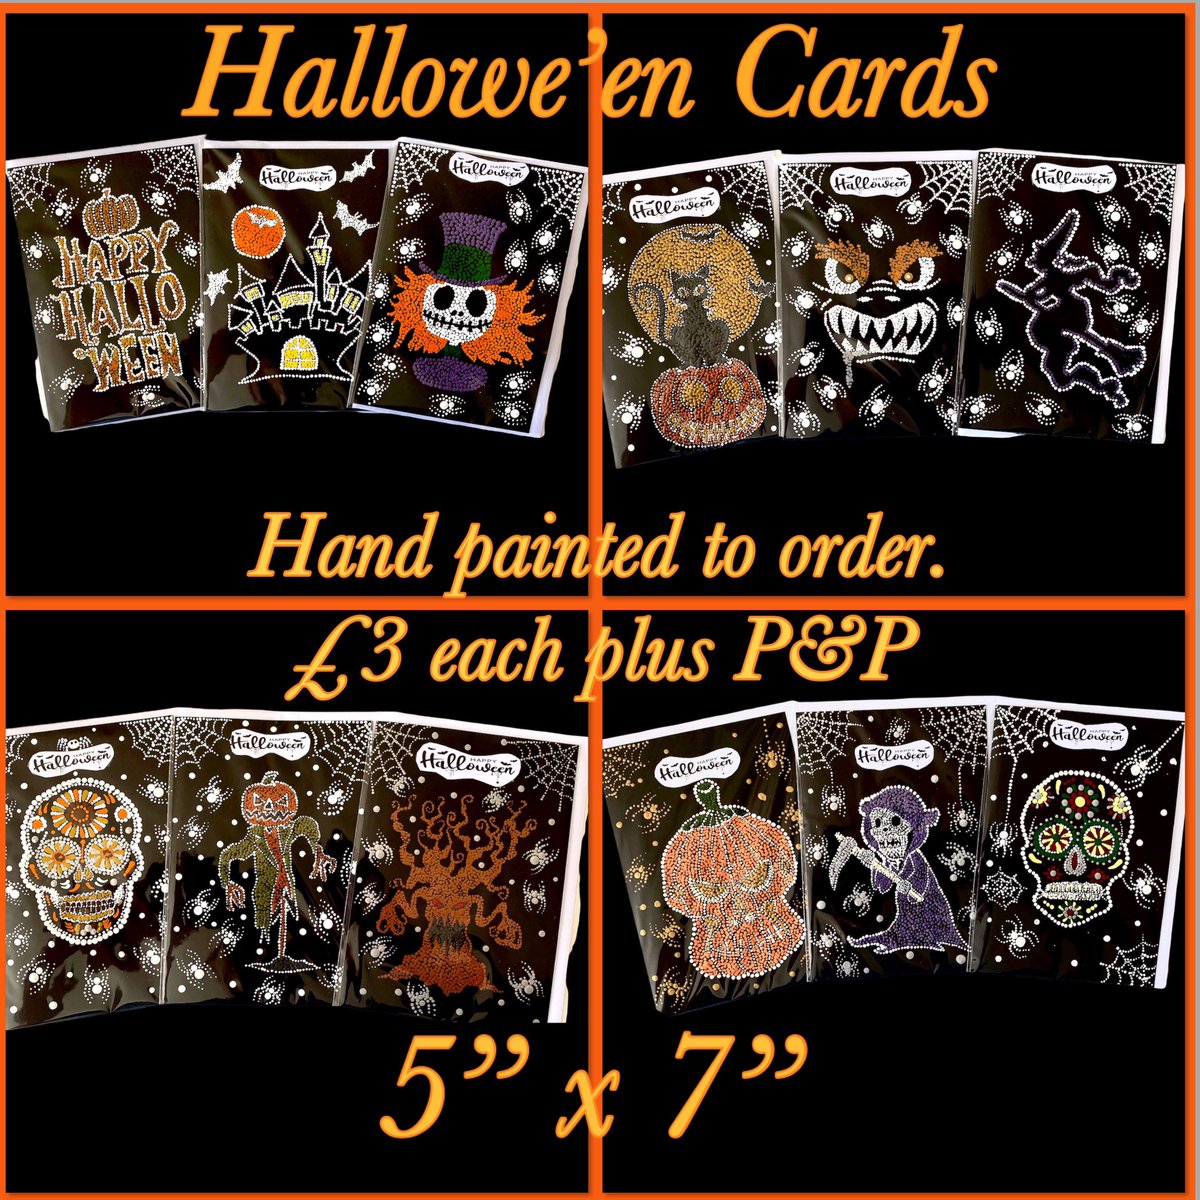 Here is the full set of hand painted, pointillism Halloween cards. Each has a different design and I can paint them to order. #cards #Halloween #Halloweencards #handpainted  #art #dotart #products #dotartwork #dotwork #artwork #dotpainting #htlmp